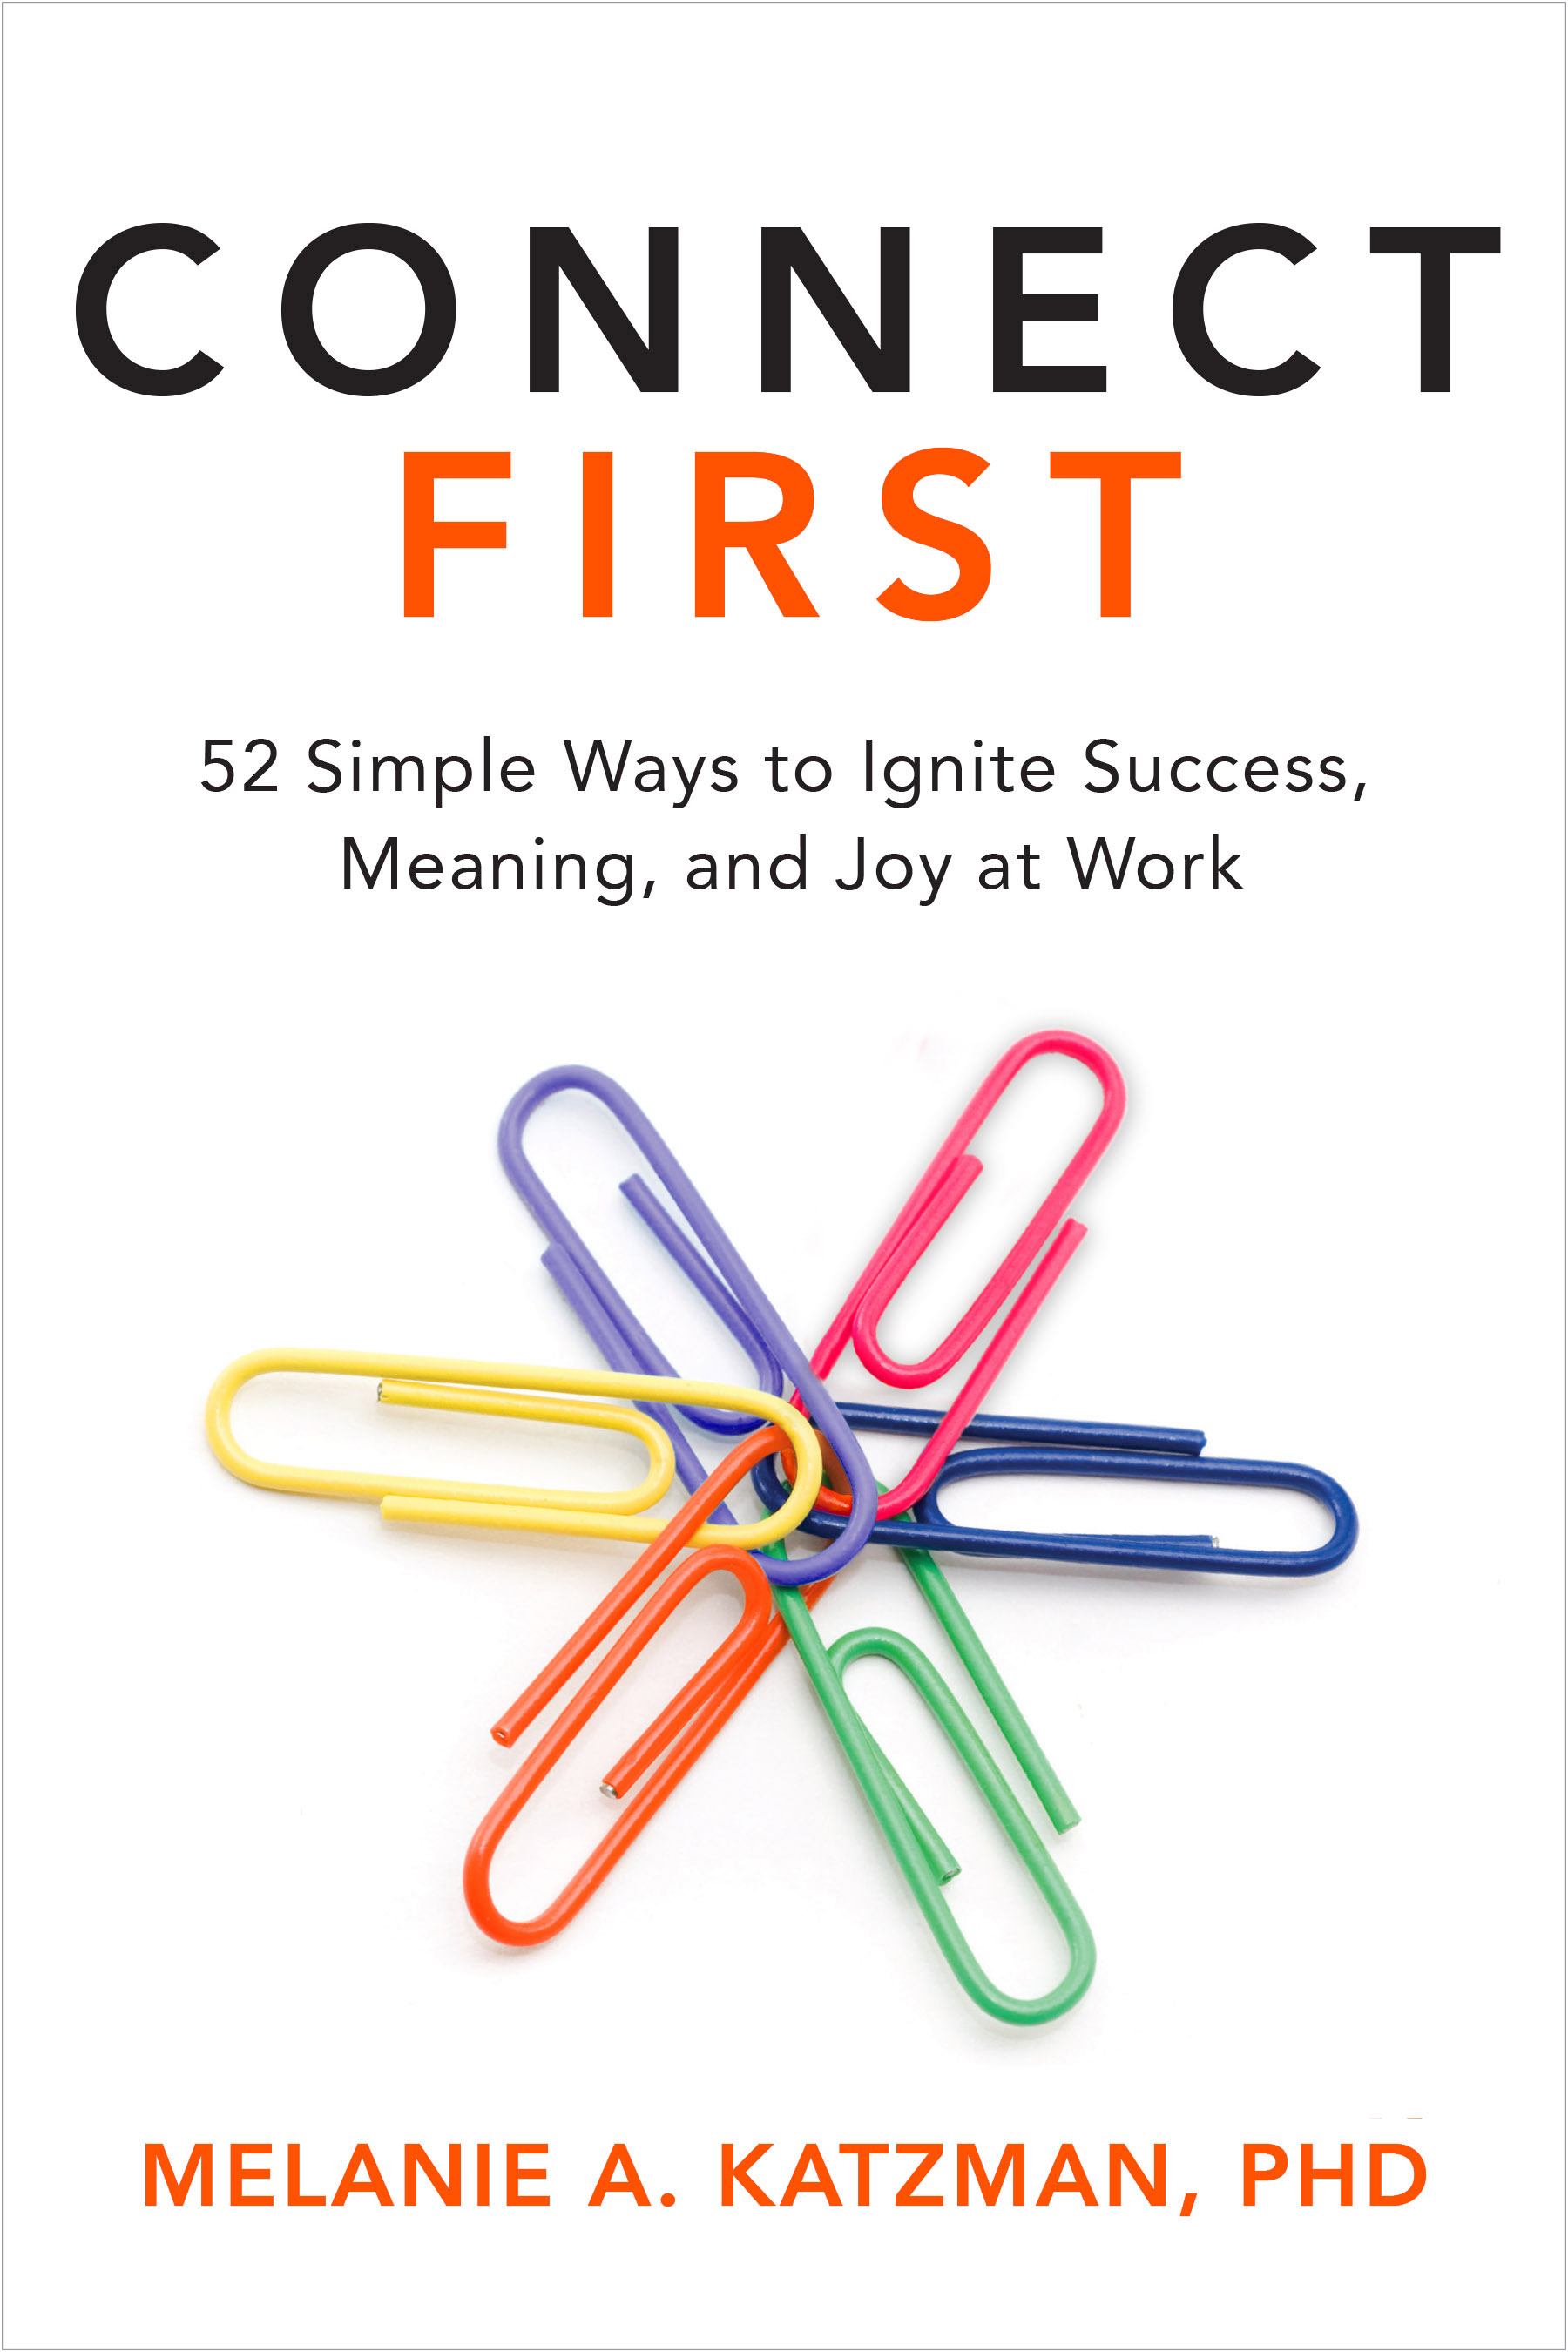 Katzman's "Connect First: 52 Simple Ways to Ignite Success, Meaning and Joy at Work" is being released this month by McGraw Hill.